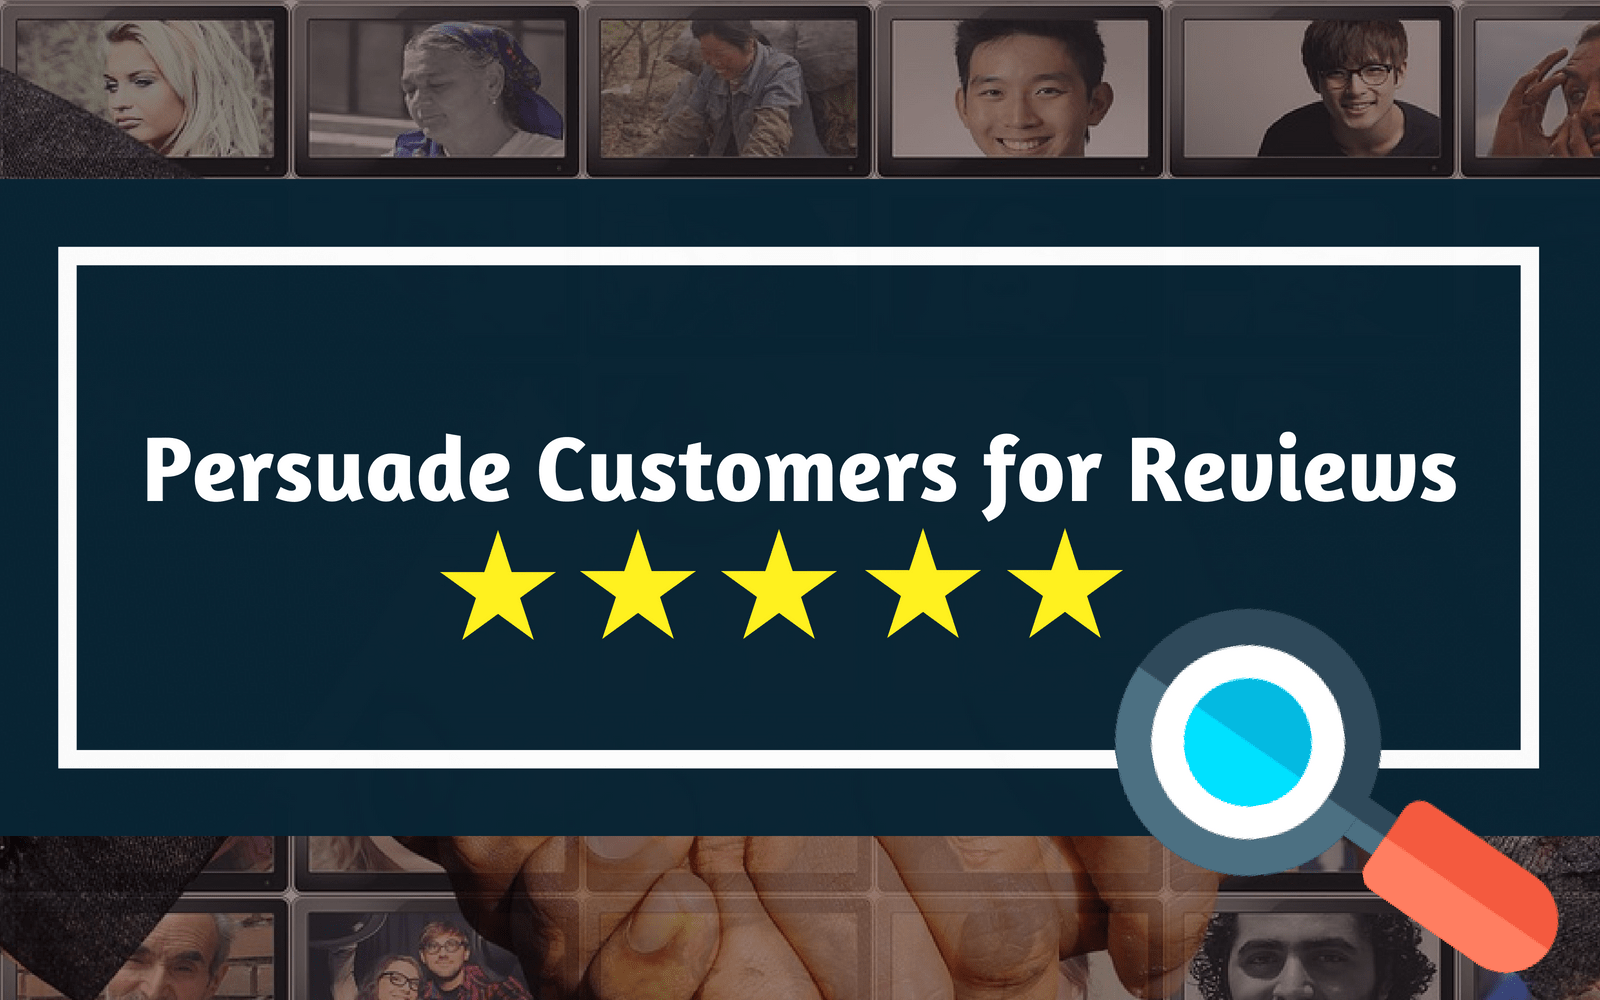 Persuade Customers for 5 Star Reviews Image